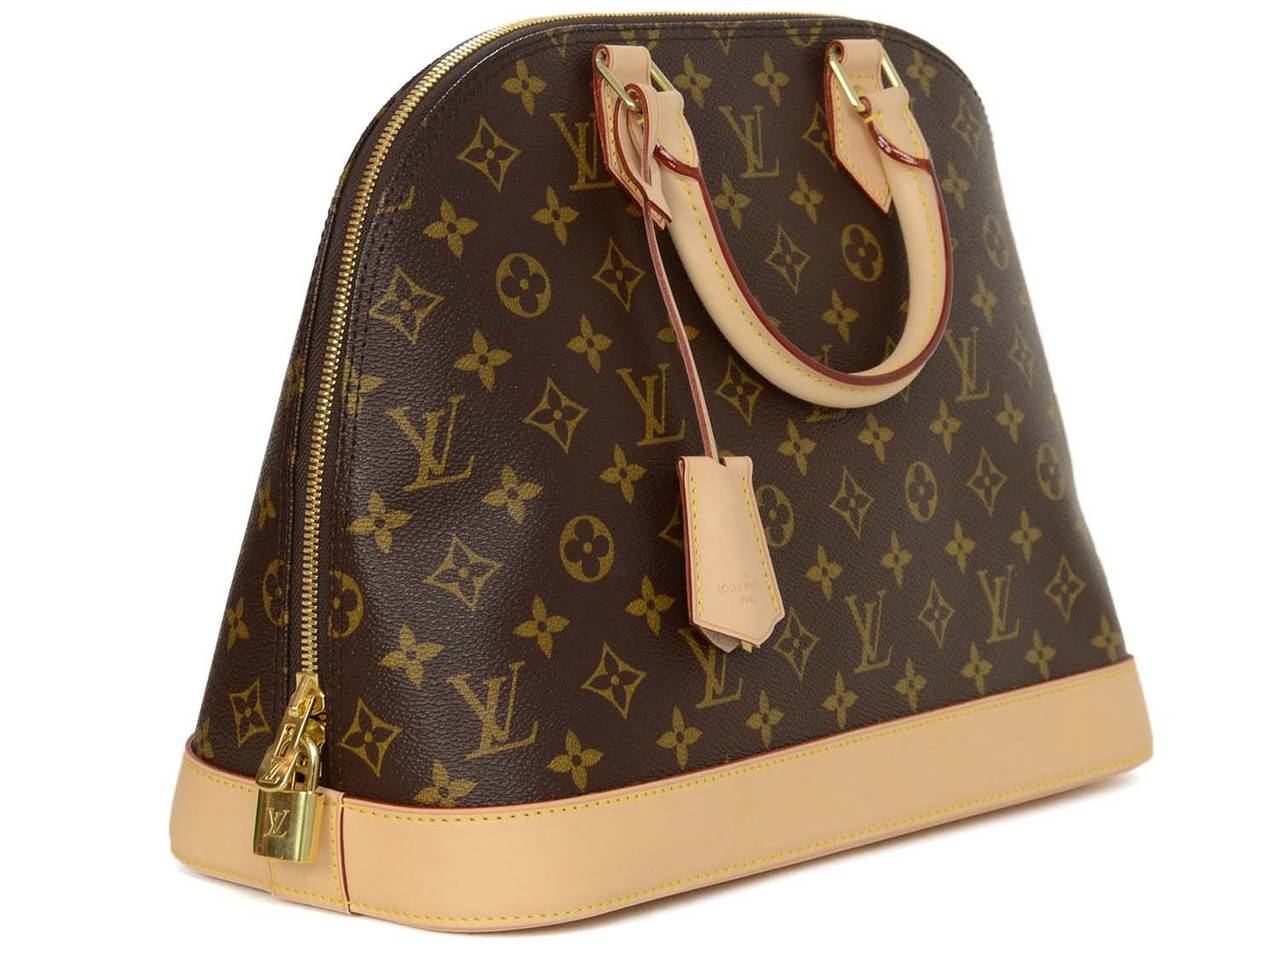 LOUIS VUITTON 2015 Coated Canvas Alma MM Bag rt $1,810 at 1stdibs